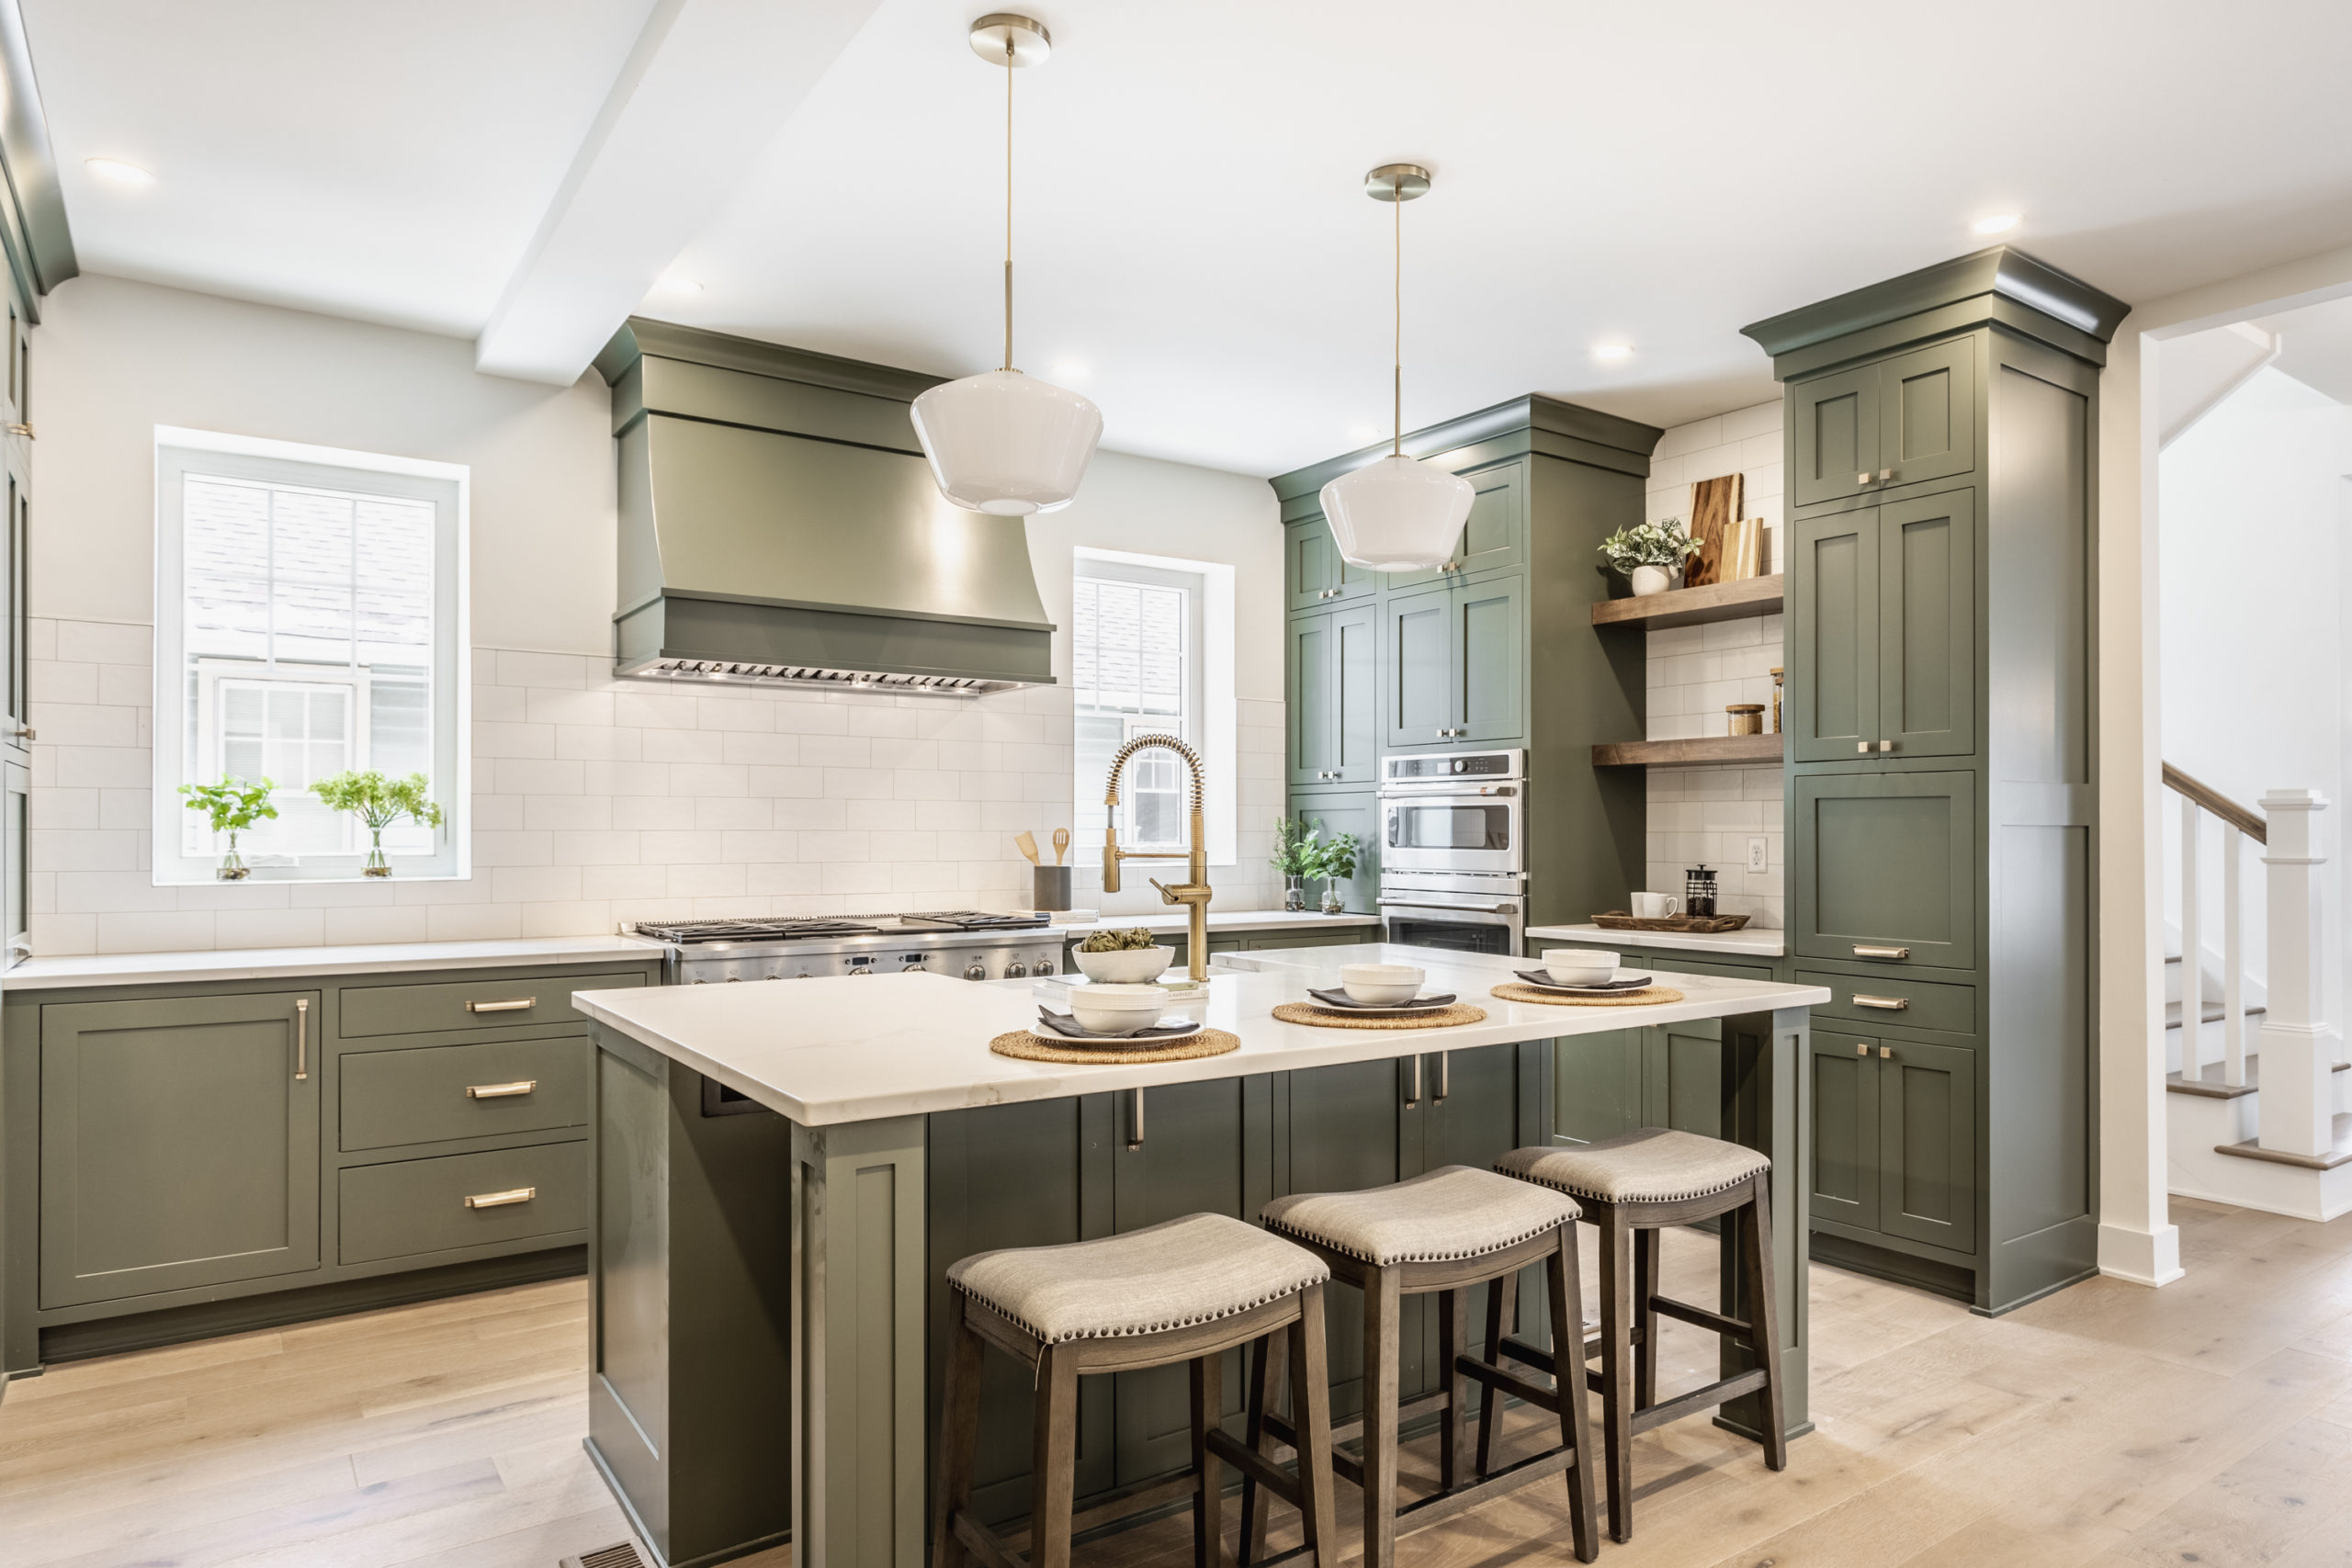 Styling a Green Kitchen